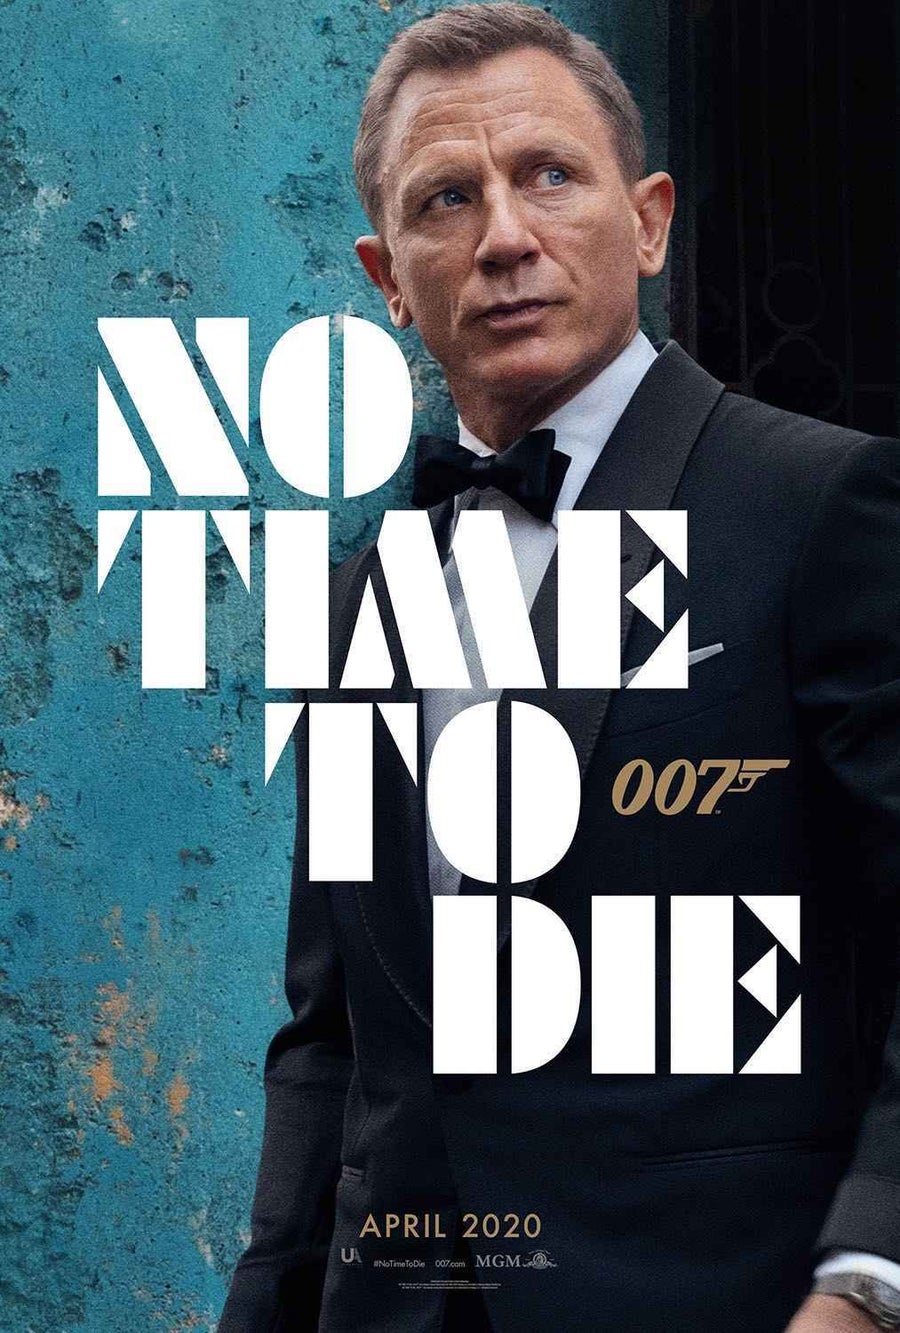 Pictured is a movie poster for “No Time to Die”, starring Ralph Fiennes.